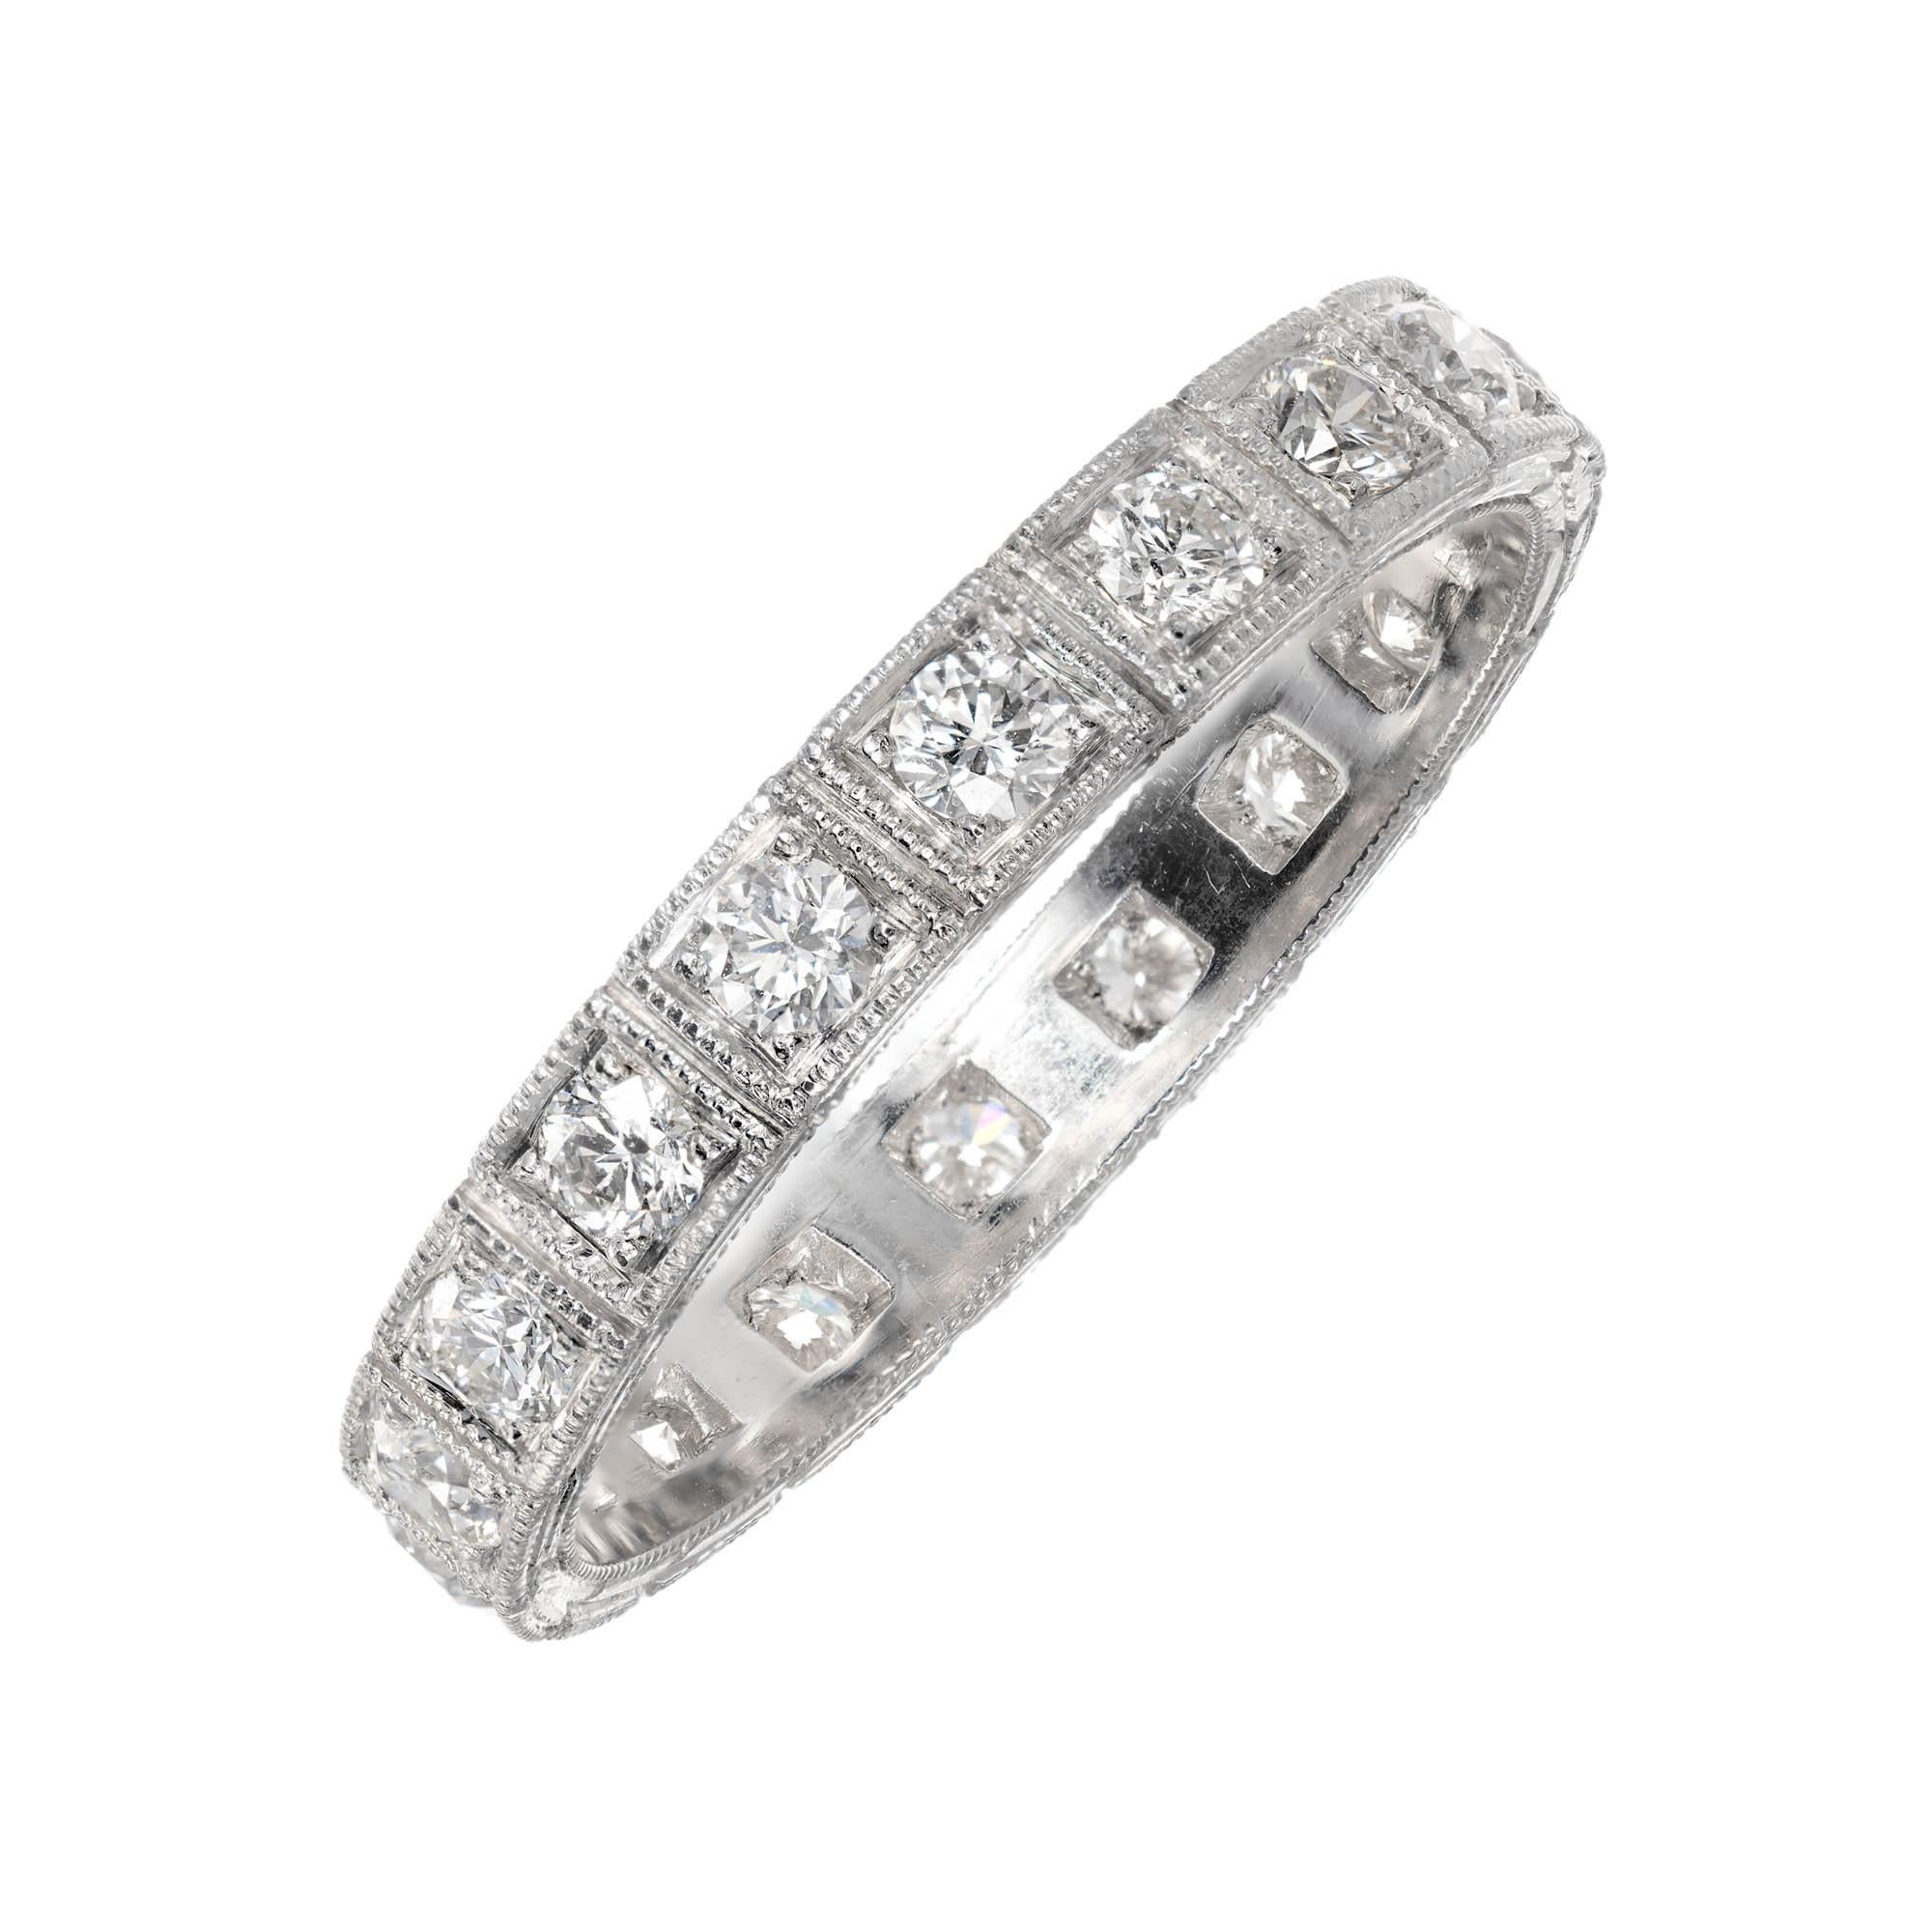 Diamond platinum wedding band ring. 18 full cut diamonds, bead set and hand engraved sides. Made in the Peter Suchy Workshop. 

18 full cut round brilliant cut diamonds, approx. total weight .54cts, F, VS2
Size 6 and sizable
Platinum
Tested: